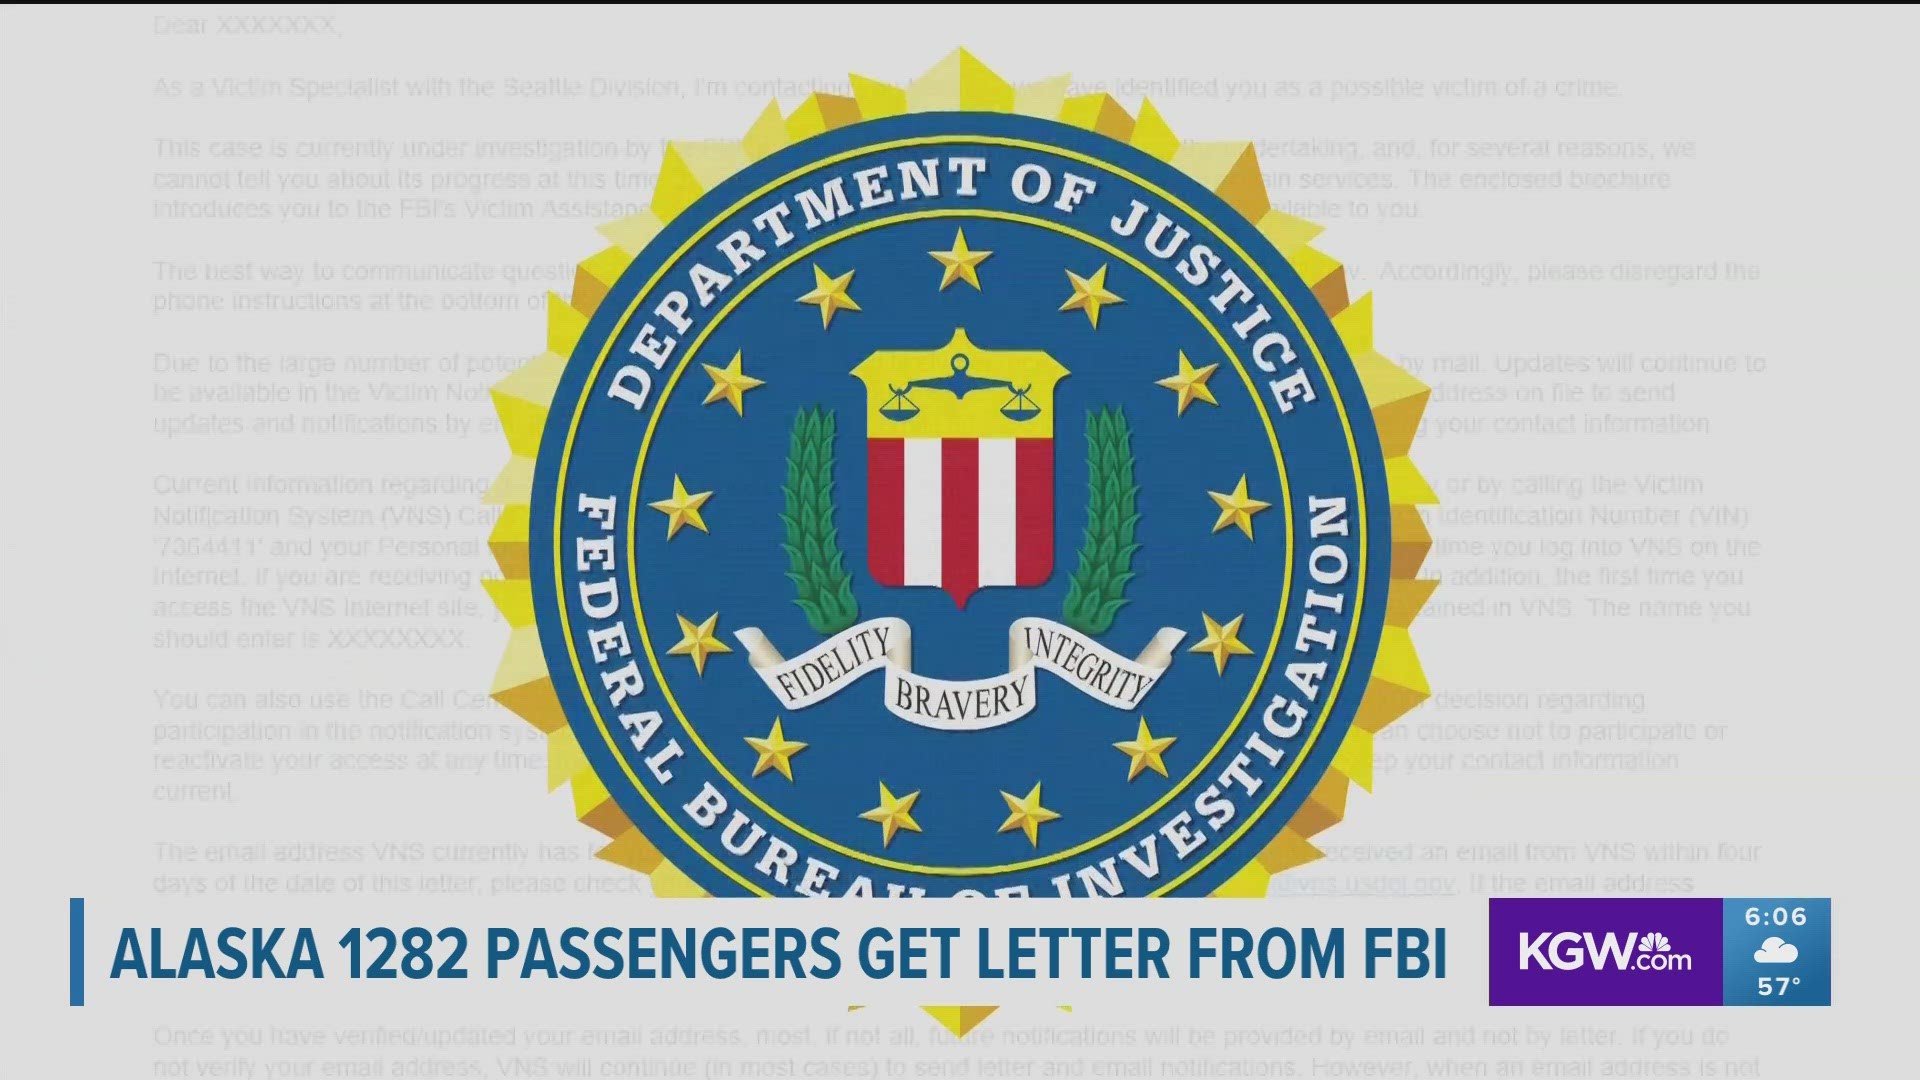 The FBI sent a letter to the passengers that the incident is currently under a federal criminal investigation, with some local passengers wary.